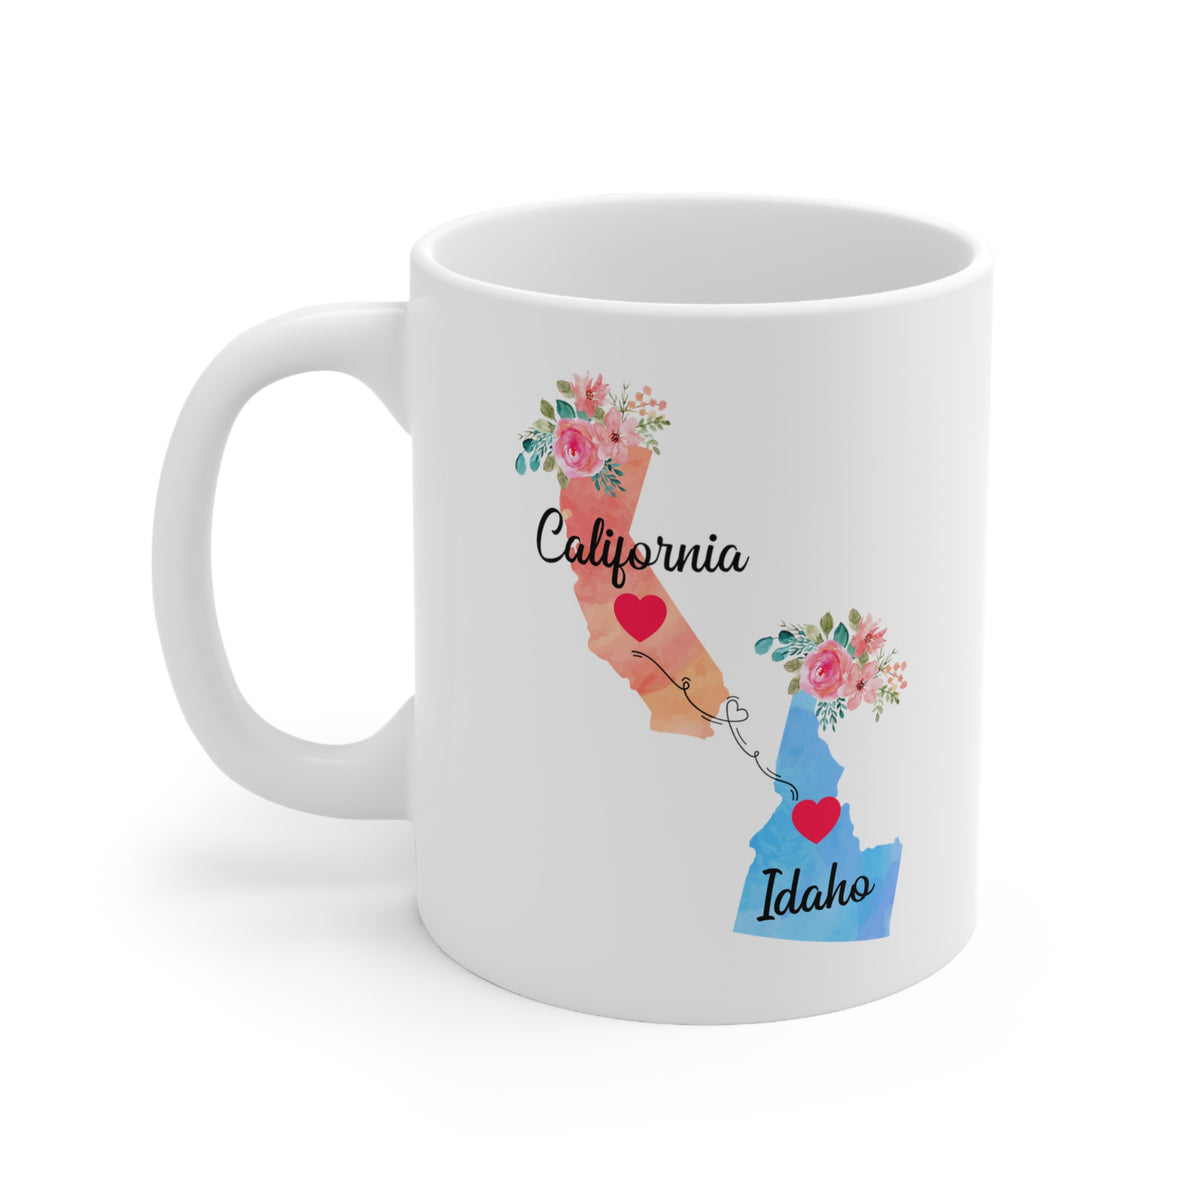 California Idaho Gifts, Long Distance State, State to State 11 OZ Coffee Mug, Christmas Gifts for Mom and Dad, Away from Family, Away from Hometown